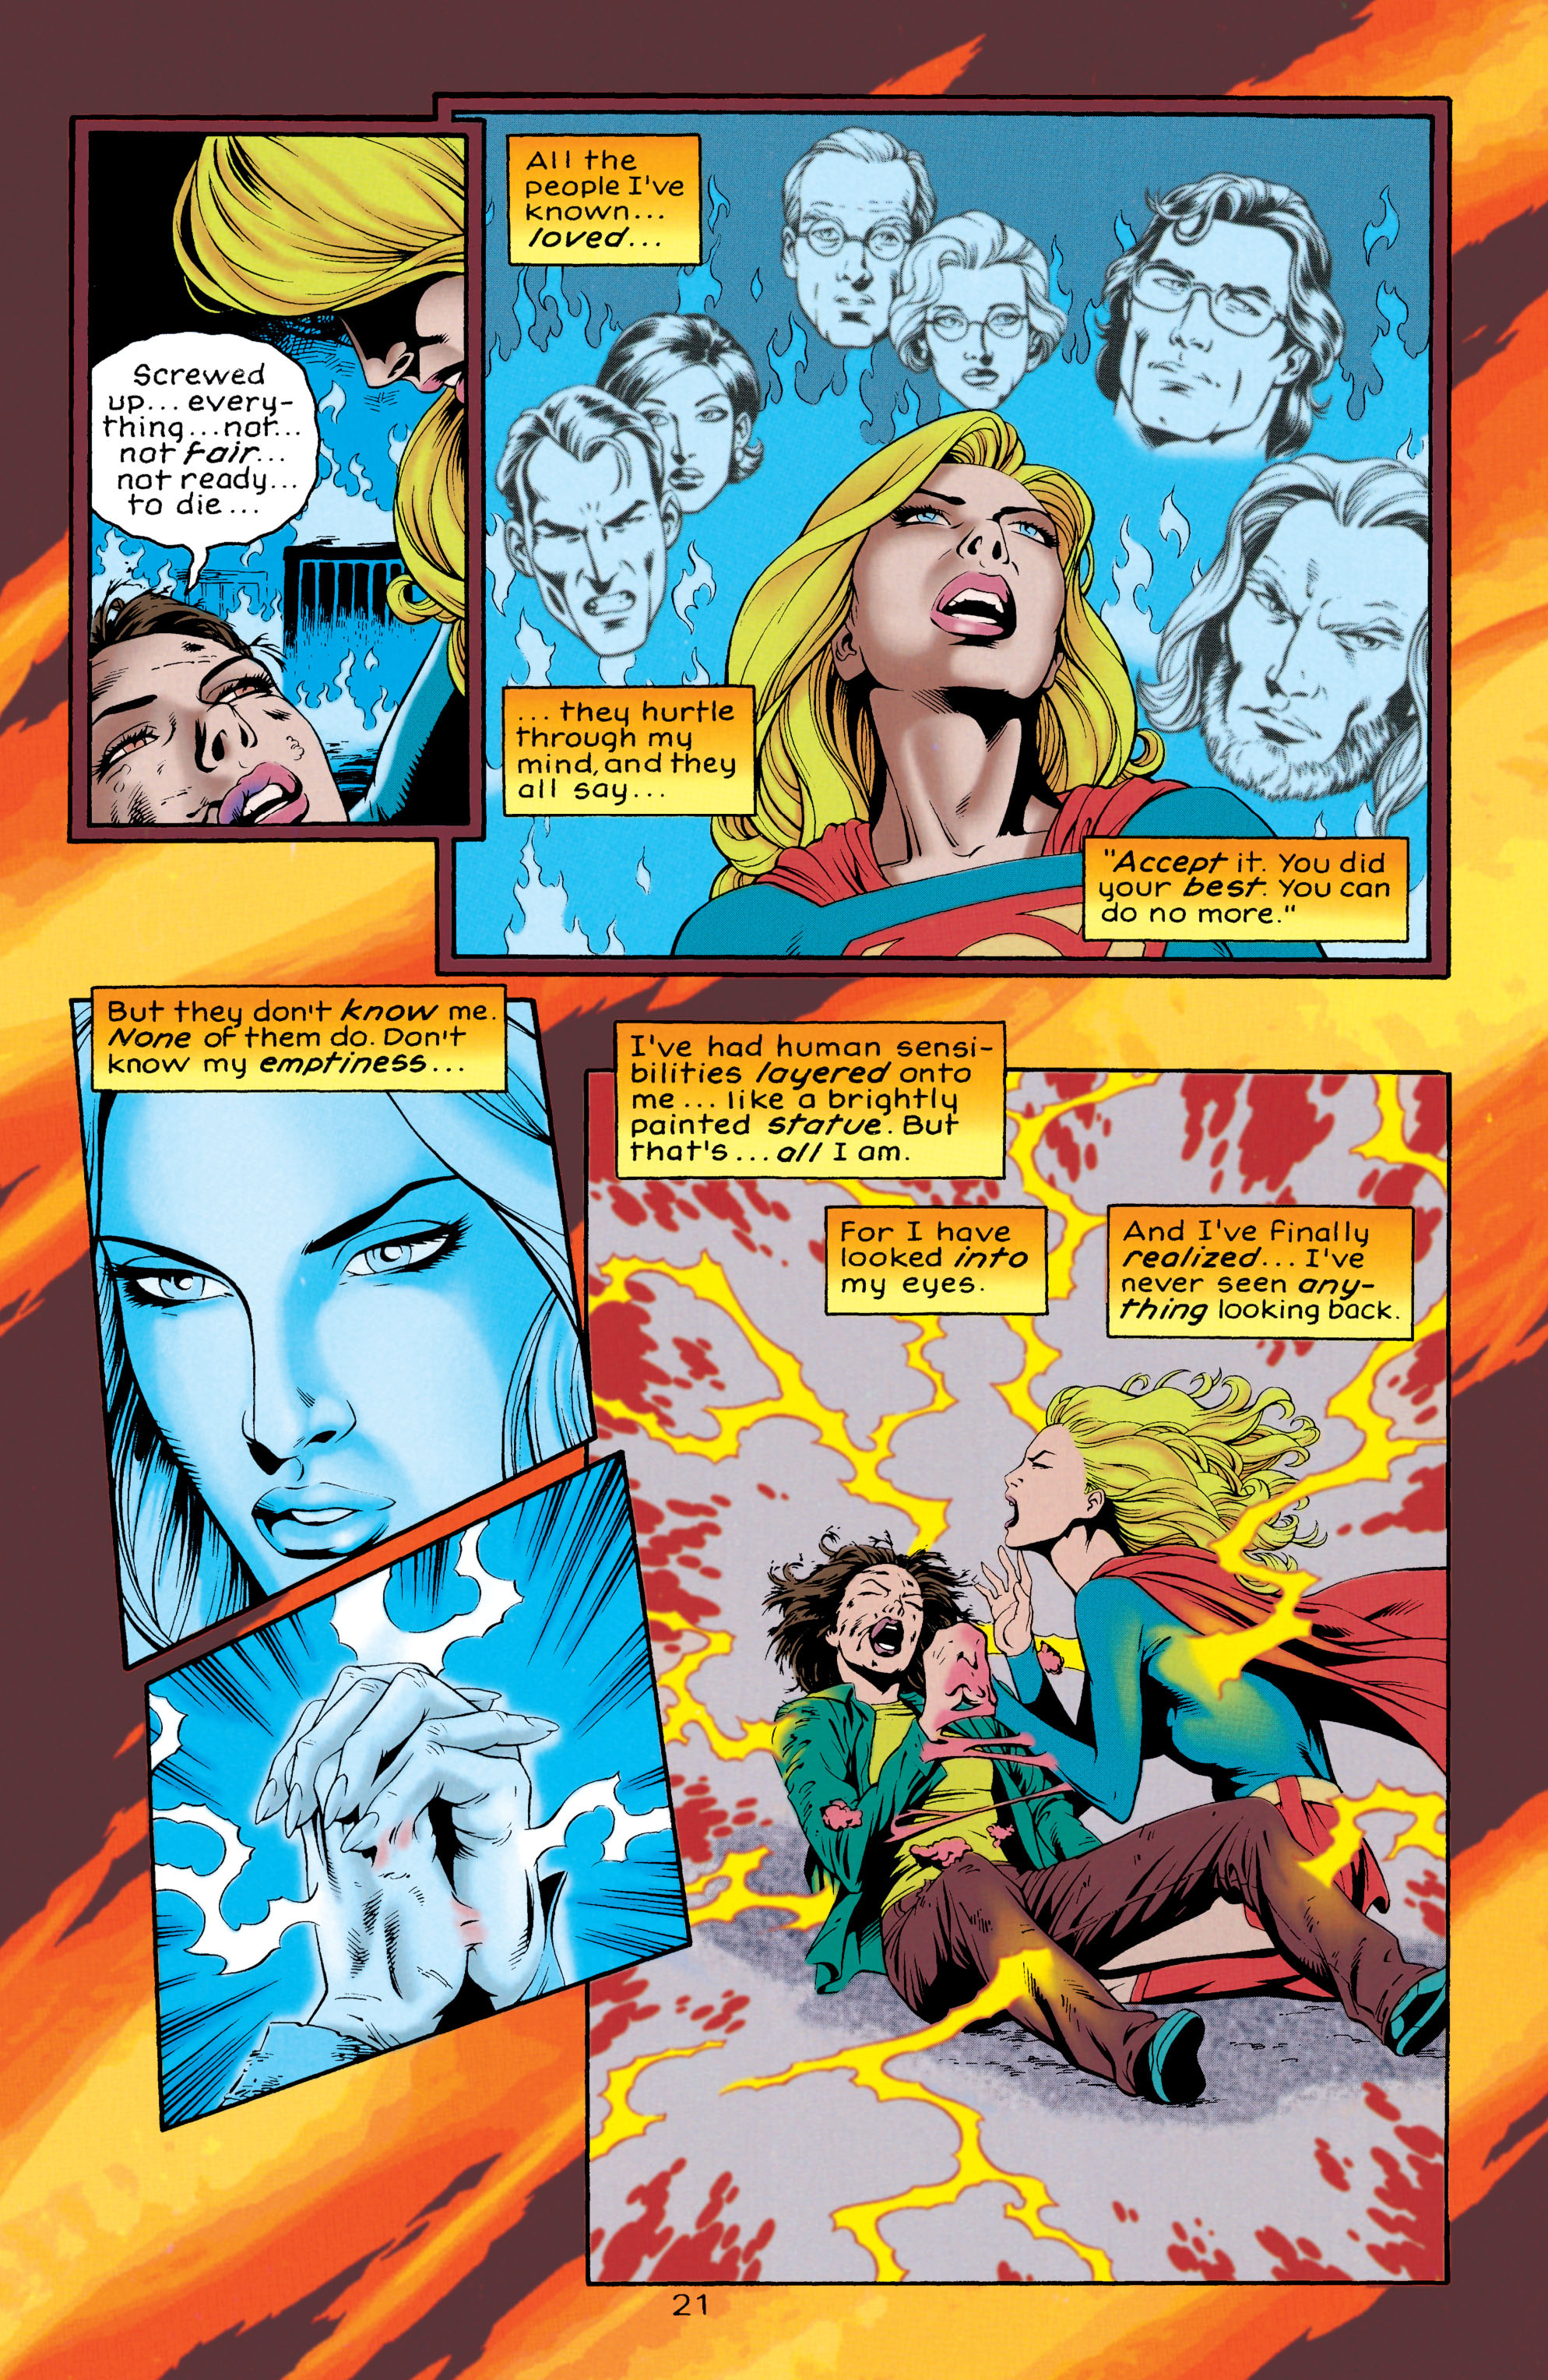 Supergirl (1996) 1 Page 21